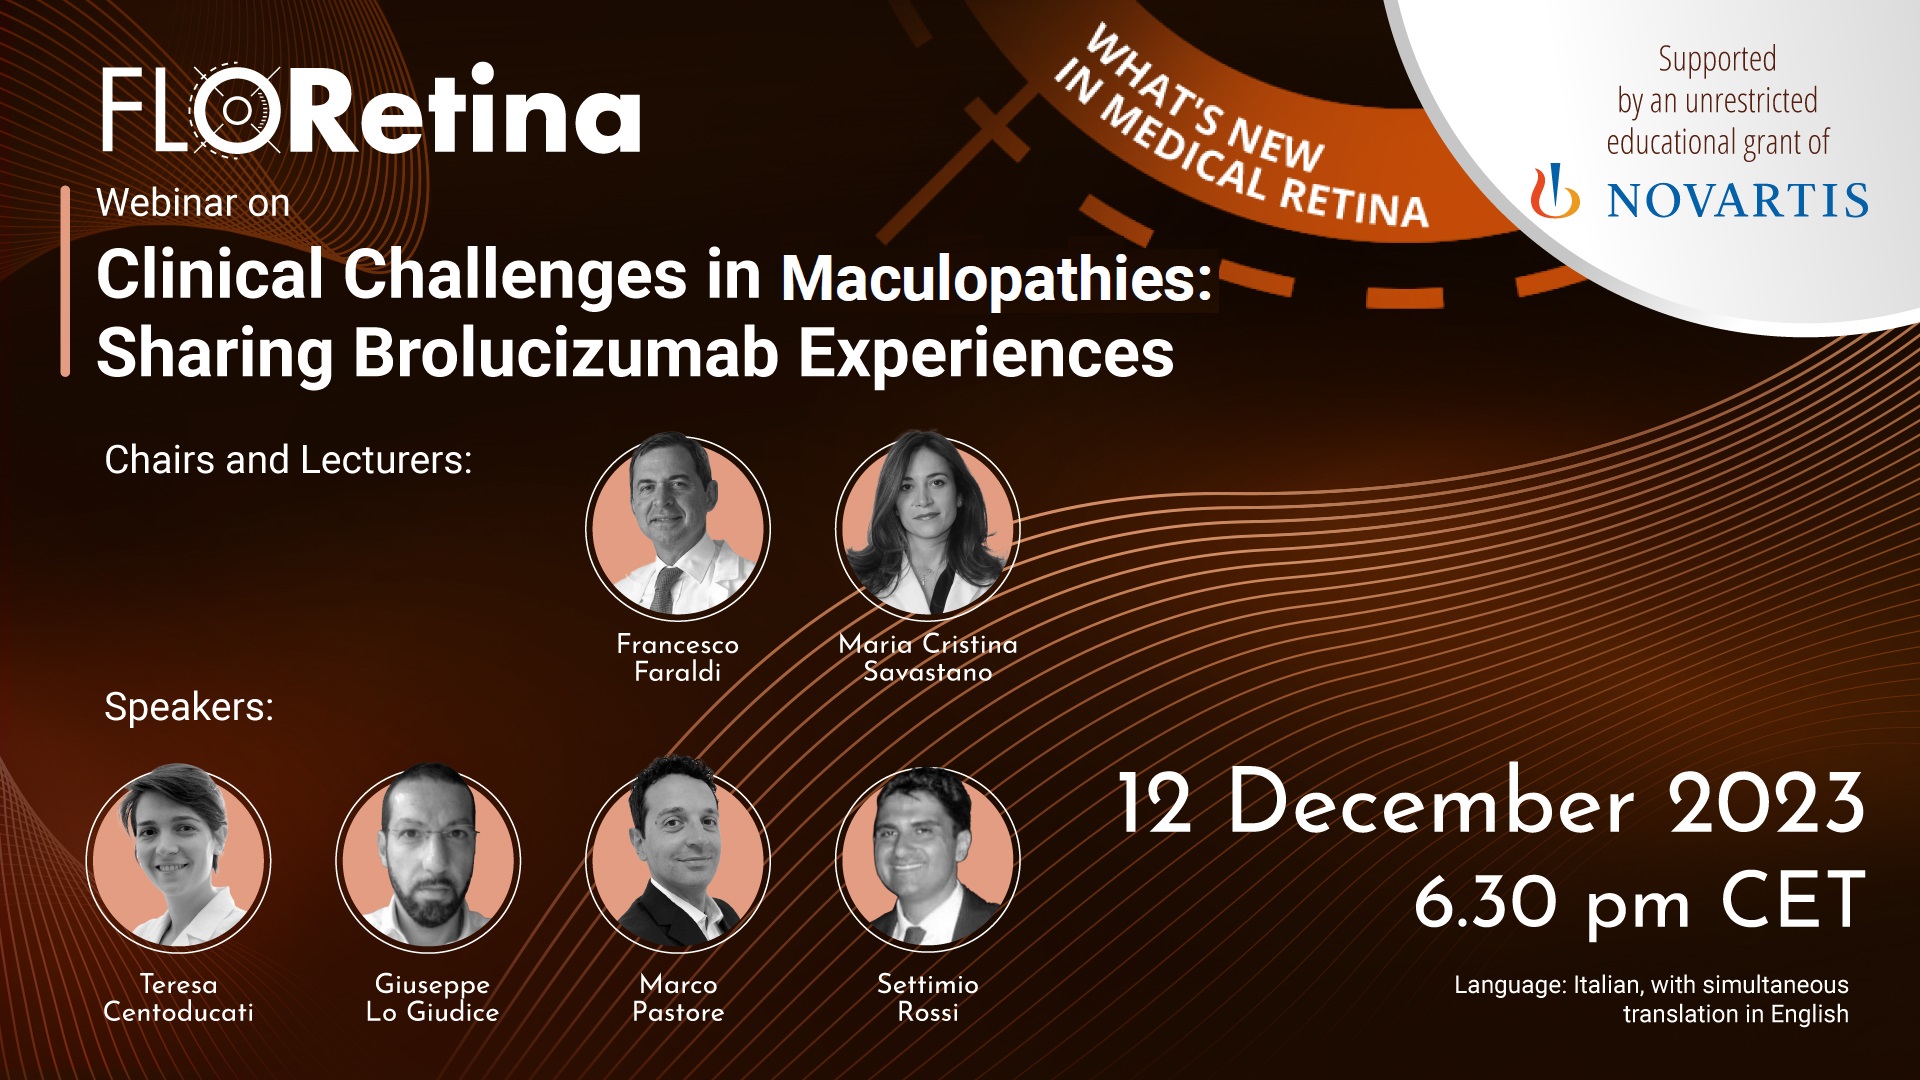 Clinical challenges in maculopathies: sharing brolucizumab experiences